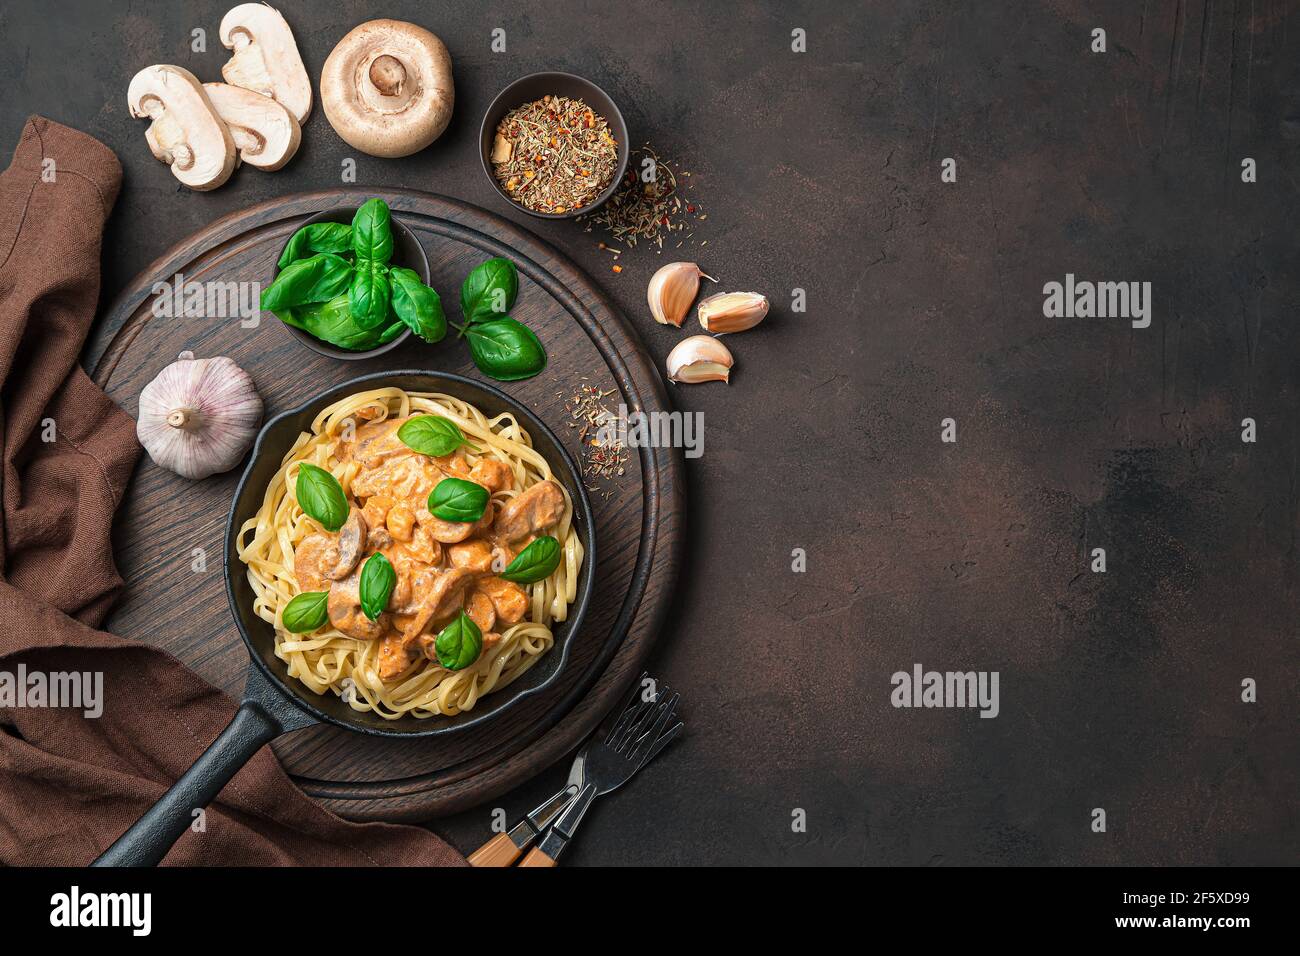 Culinary background with pasta and creamy mushroom sauce, basil, garlic and spices on a dark brown background. Stock Photo